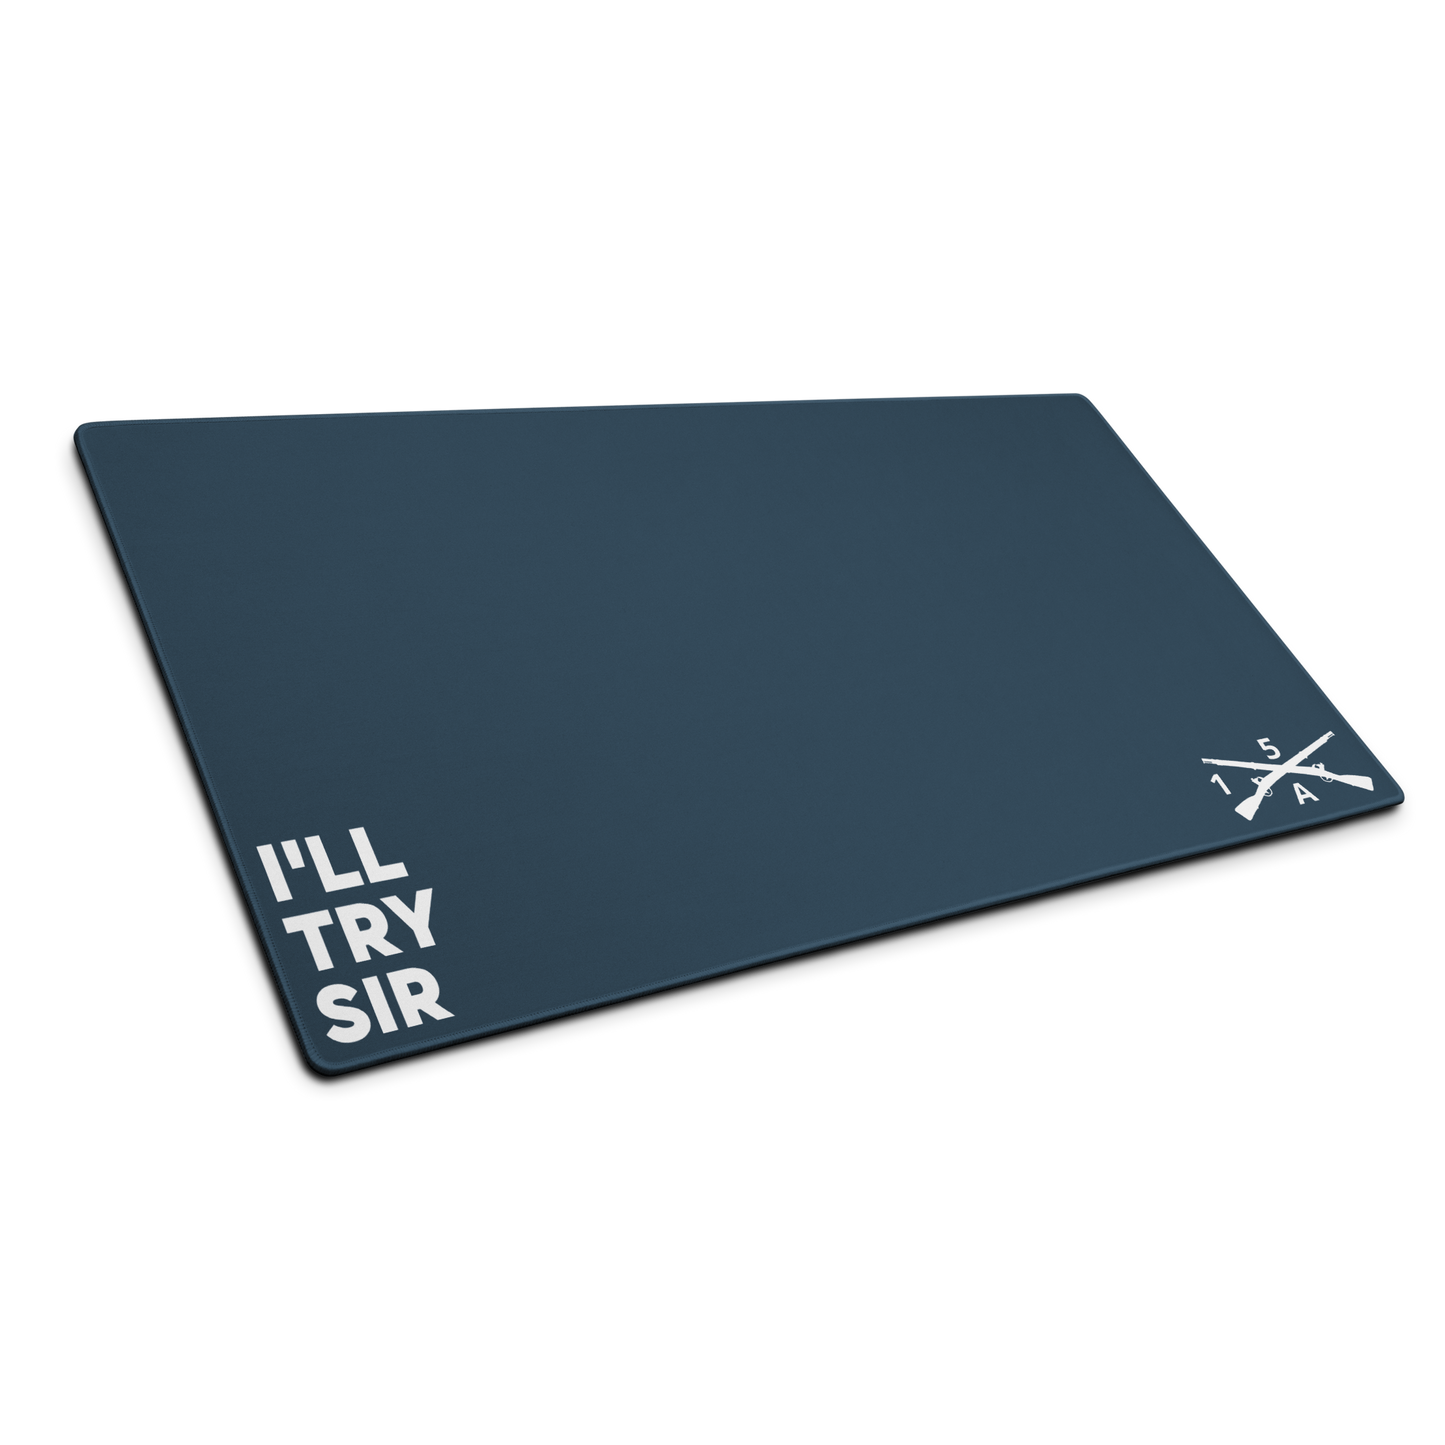 A Co. 1/5 Infantry 36" XL Gaming Mousepad